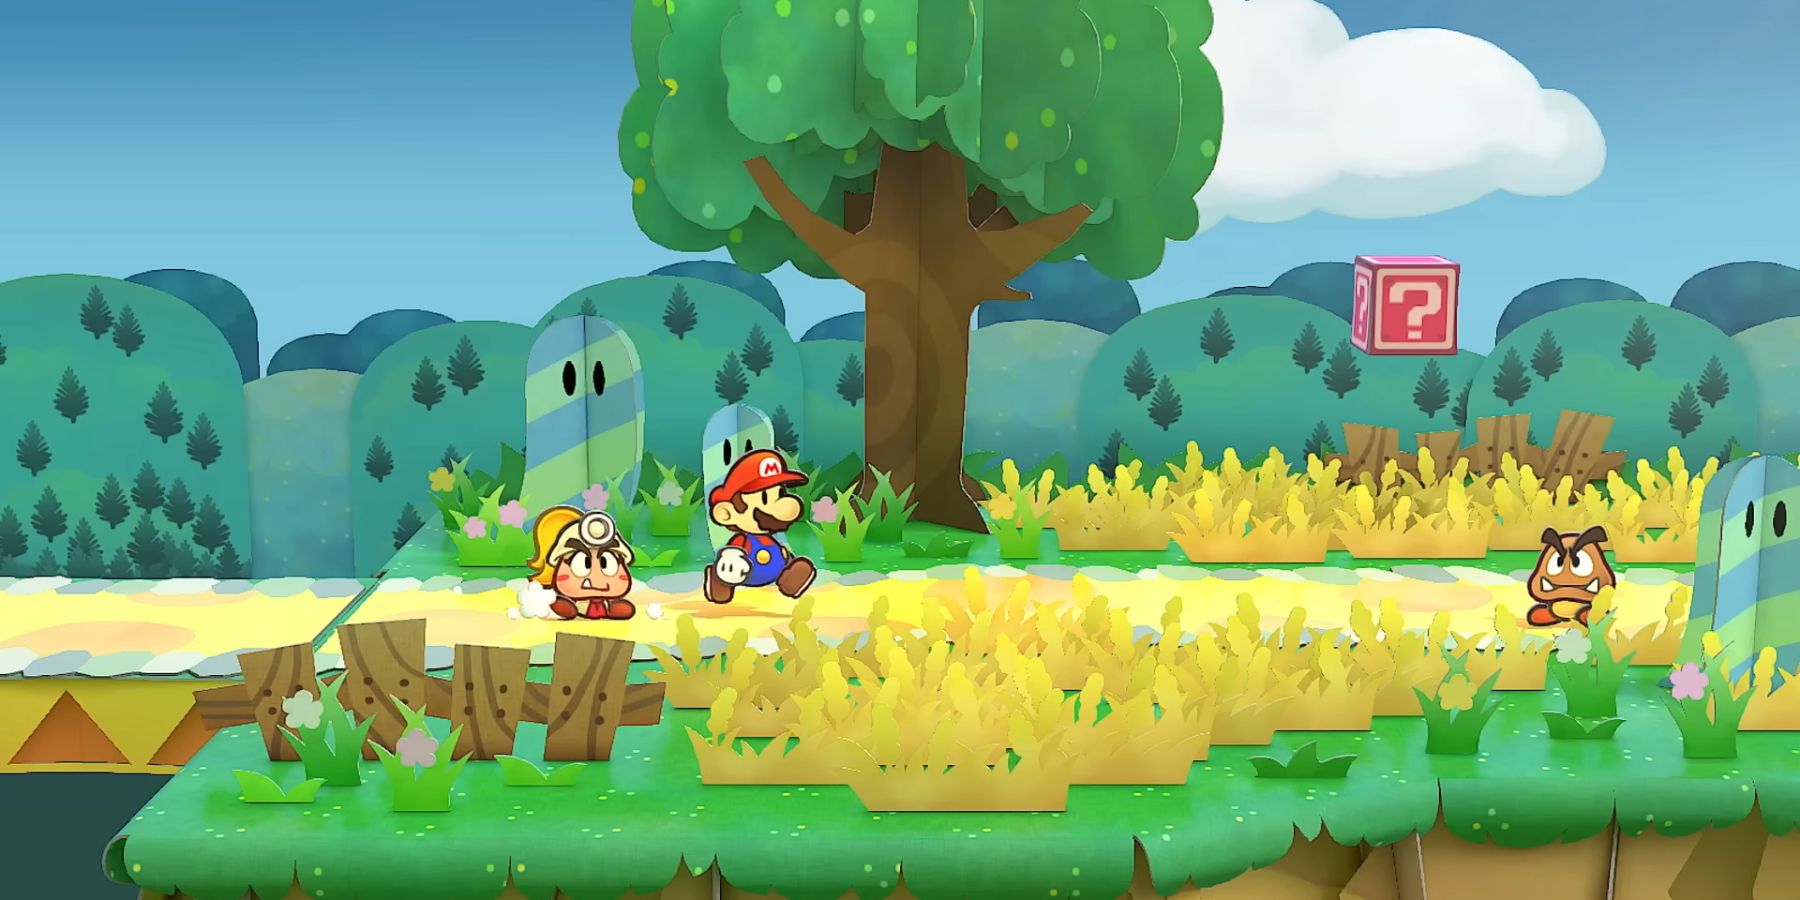 Mario, in an art style that makes him look like paper, traveling with Goombella, a female Goomba with a mining helmet on. The two are on a dirt road heading toward a hostile Goomba. There is a red question mark block floating in the air.